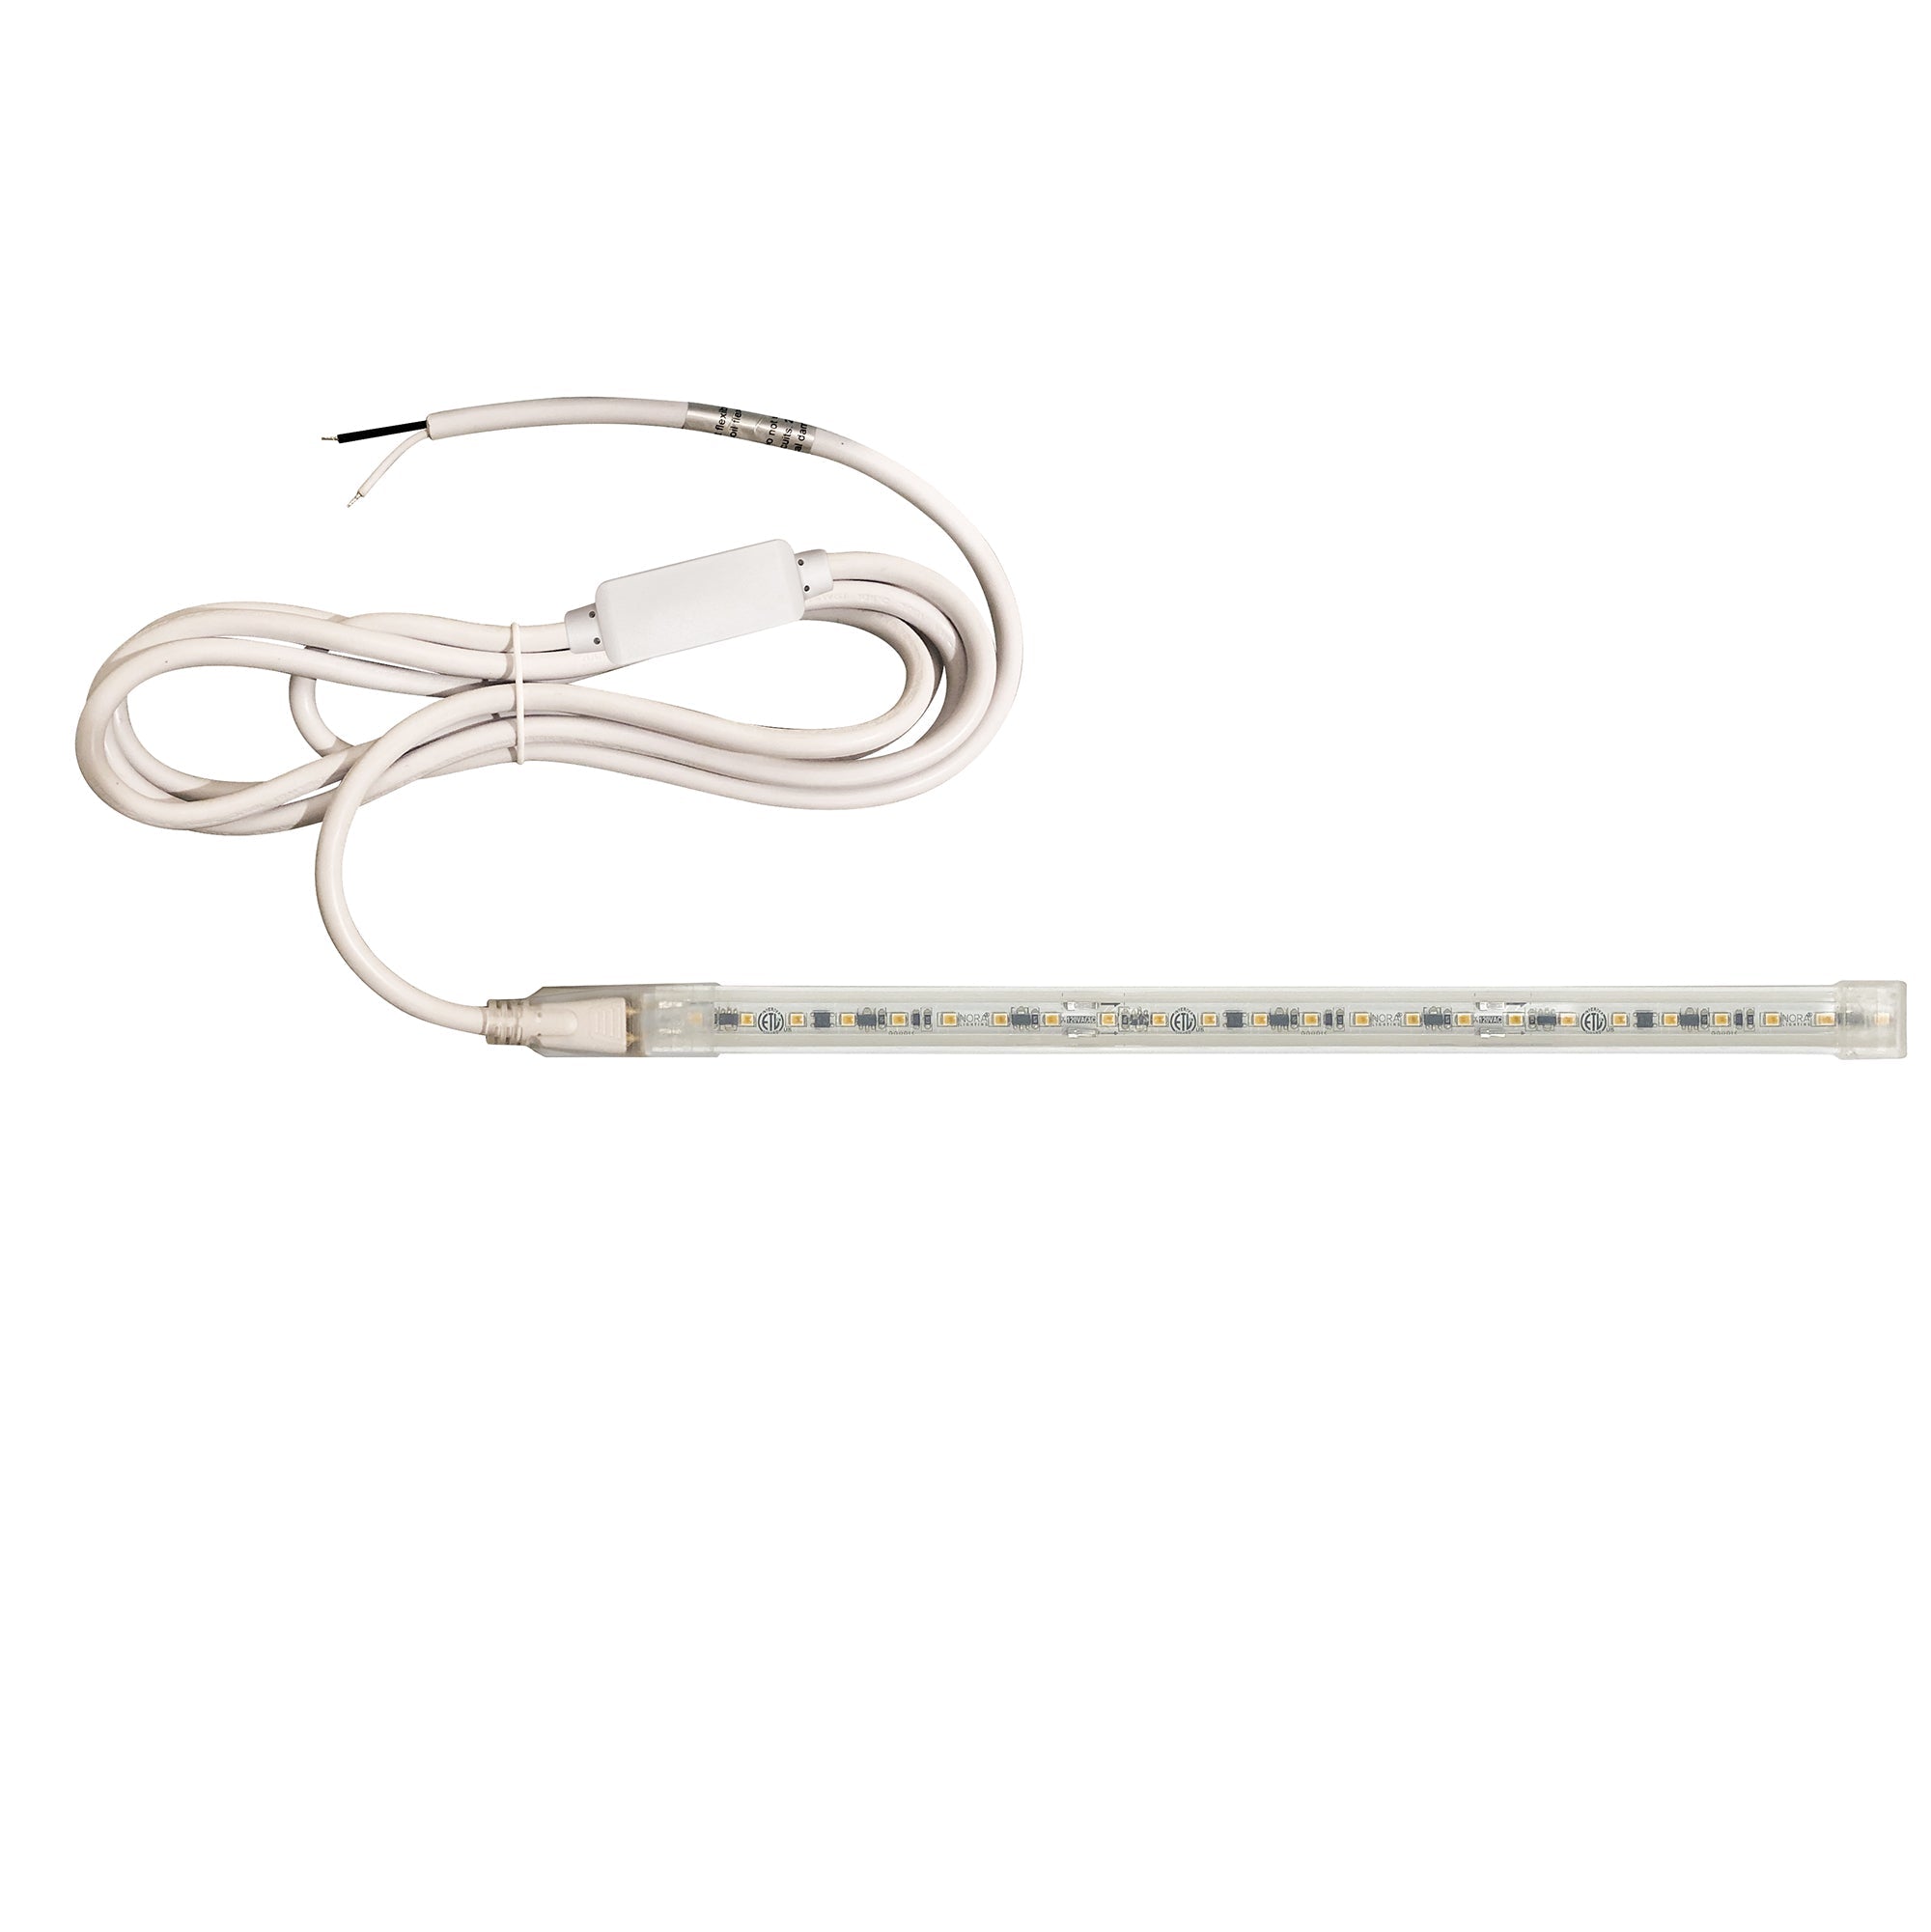 Nora Lighting NUTP13-W5-8-12-930/HWSP - Accent / Undercabinet - Custom Cut 5-ft, 8-in 120V Continuous LED Tape Light, 330lm / 3.6W per foot, 3000K, w/ Mounting Clips and 8' Hardwired Power Cord w/ Surge Protector